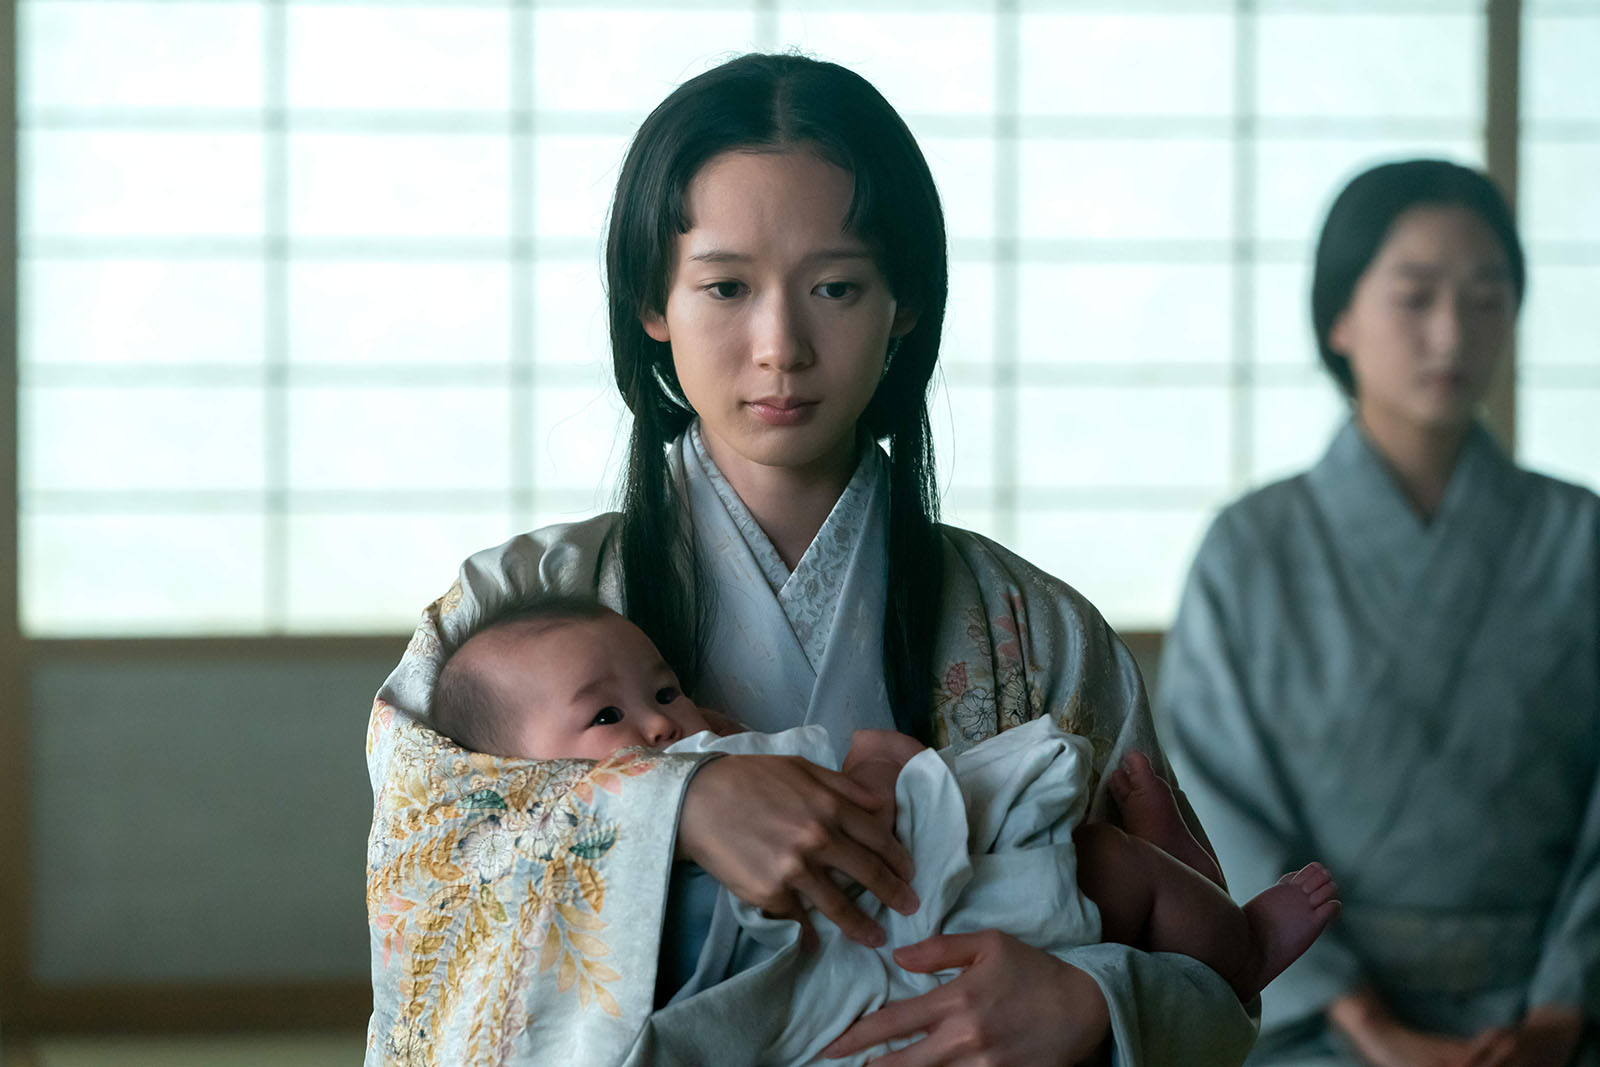 Fuji must tragically sacrifice her own child after her husband offends the Counsel of Regents. Image © FX